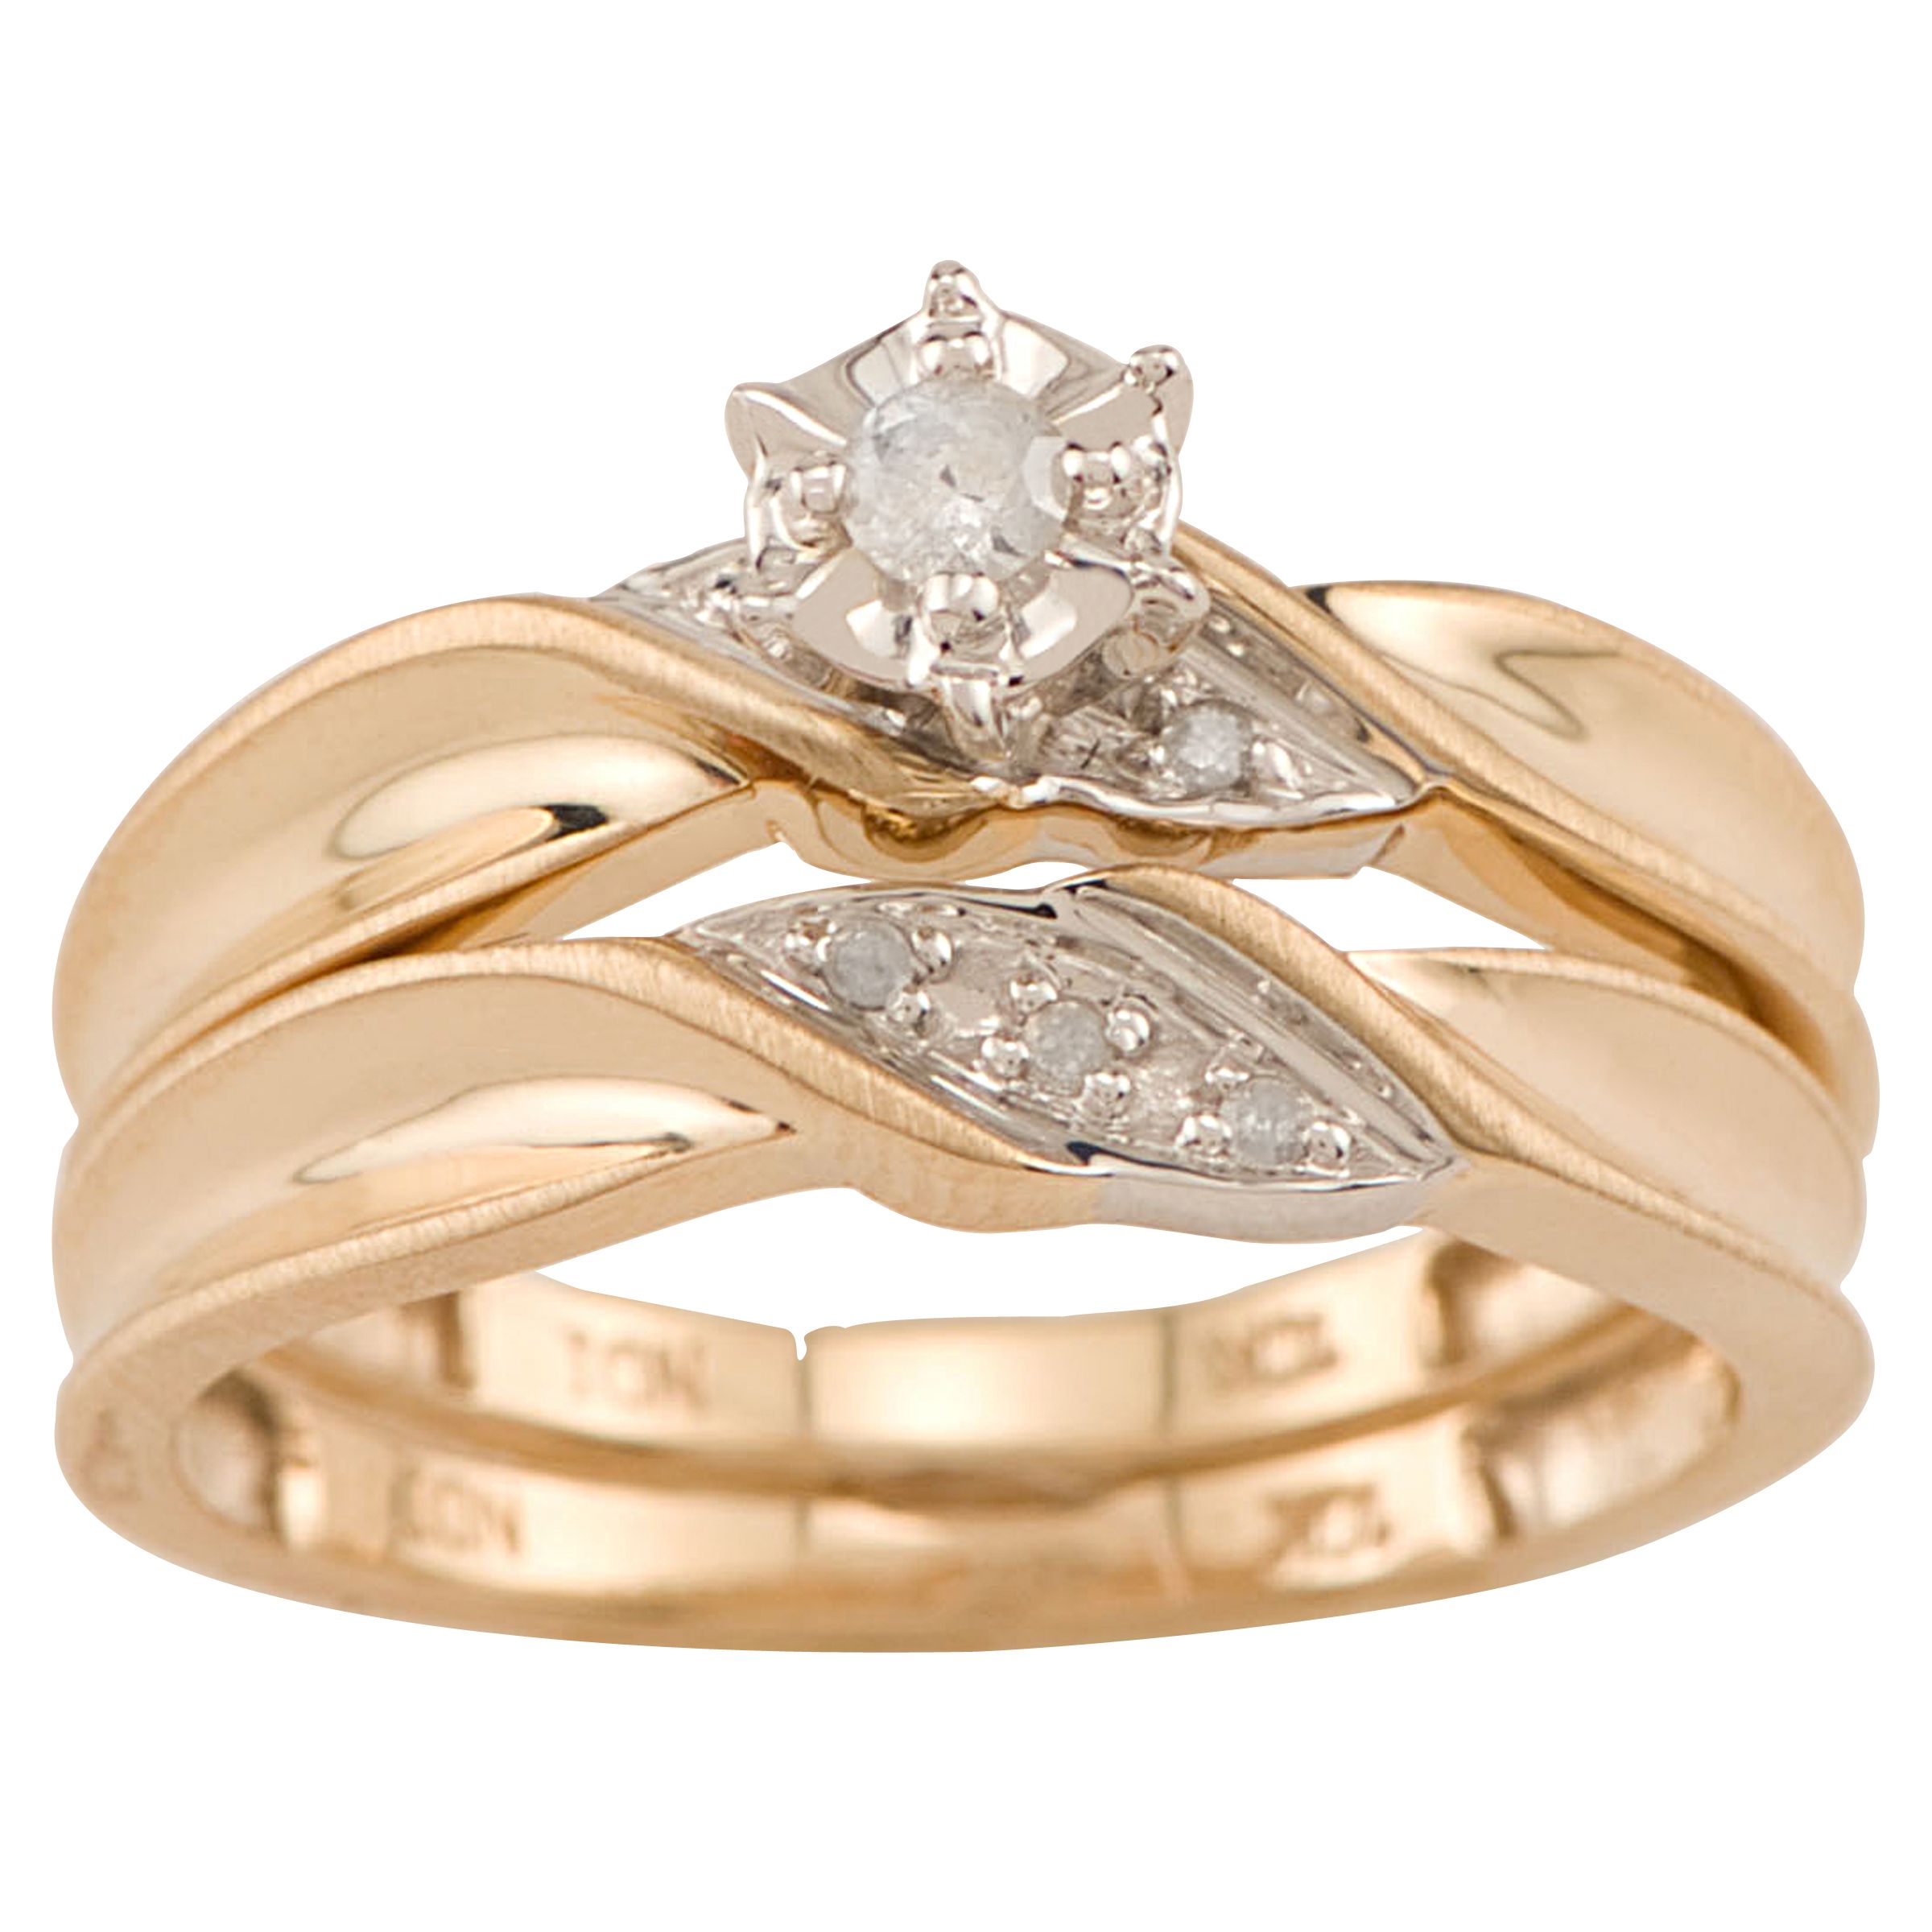 10k Yellow Gold Trio Bridal Set with Diamond Accents